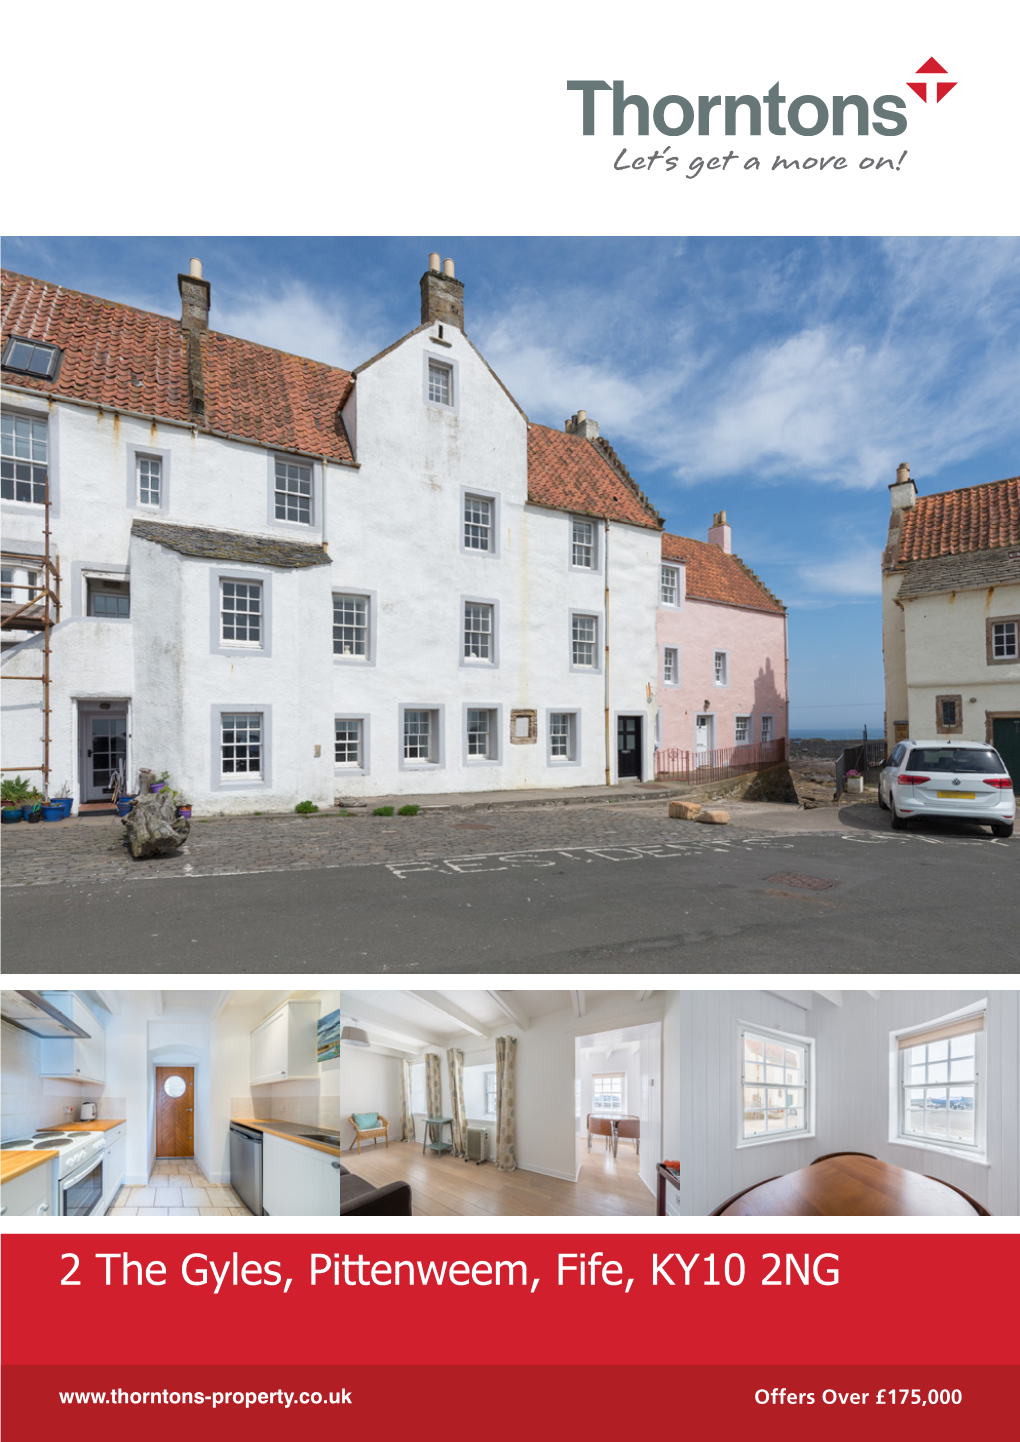 2 the Gyles, Pittenweem, Fife, KY10 2NG